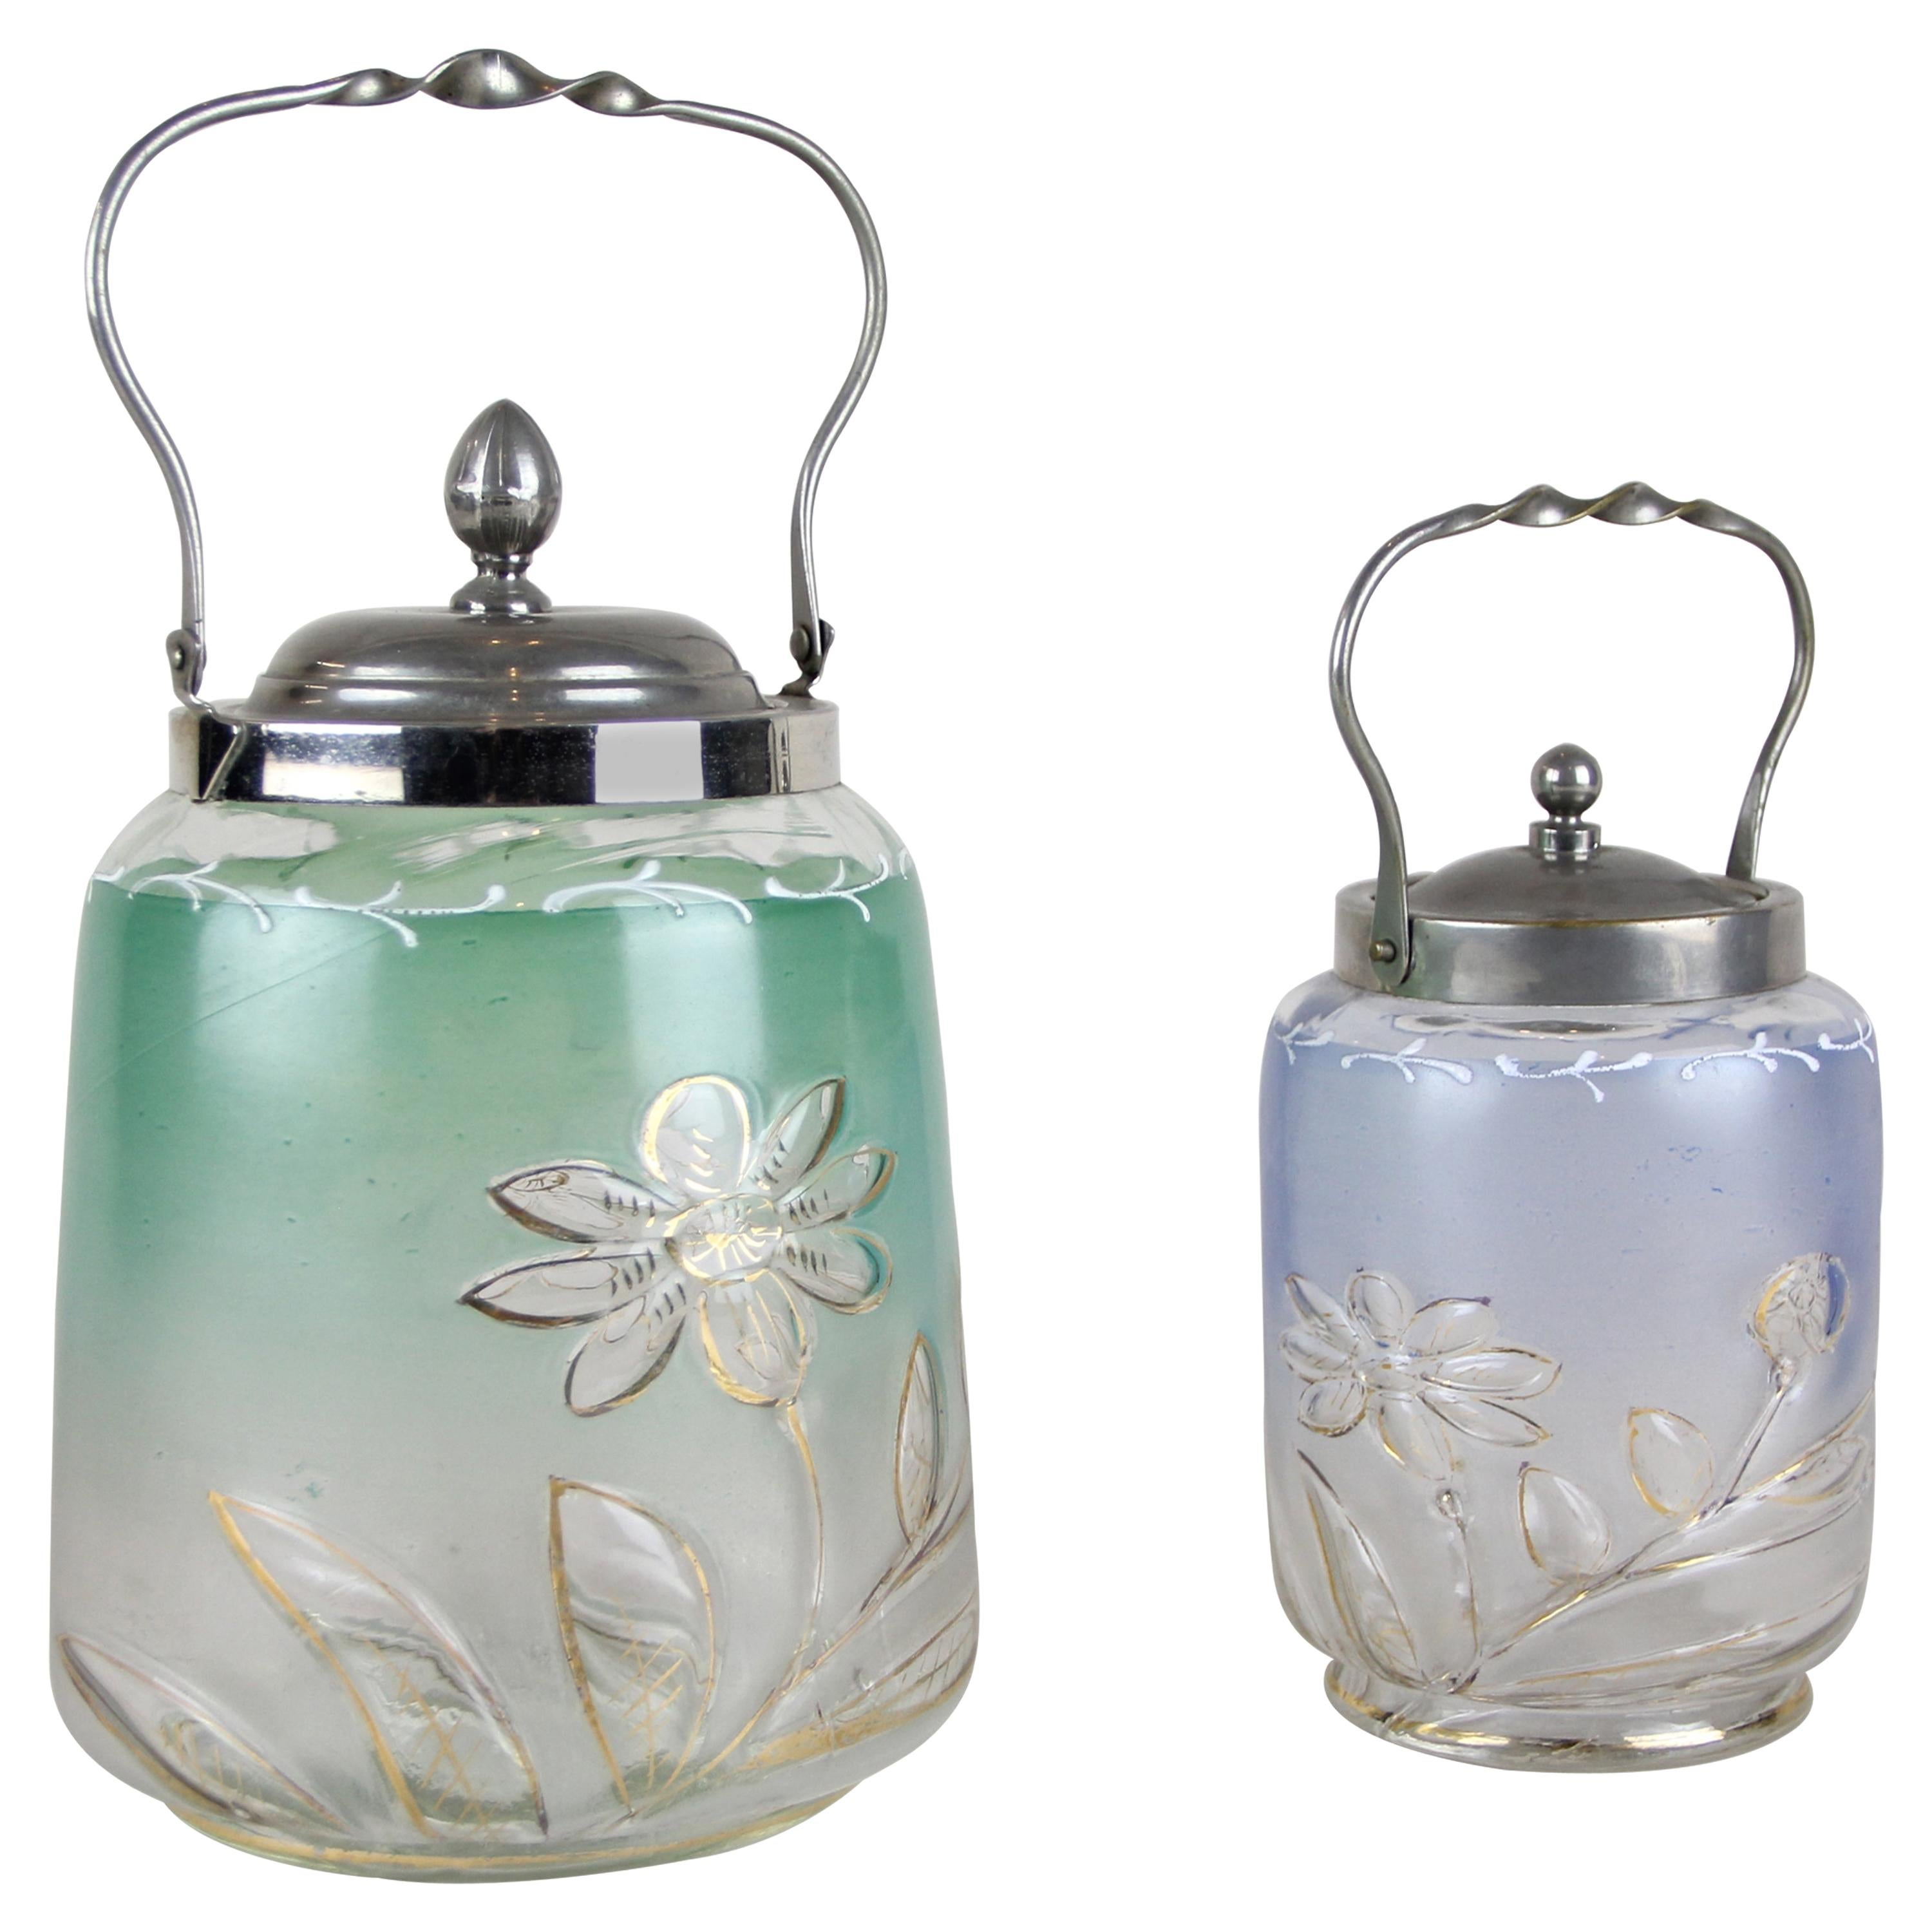 Set of Two Colored Glass Jars/ Bonbonniere with Lid, Austria, circa 1920